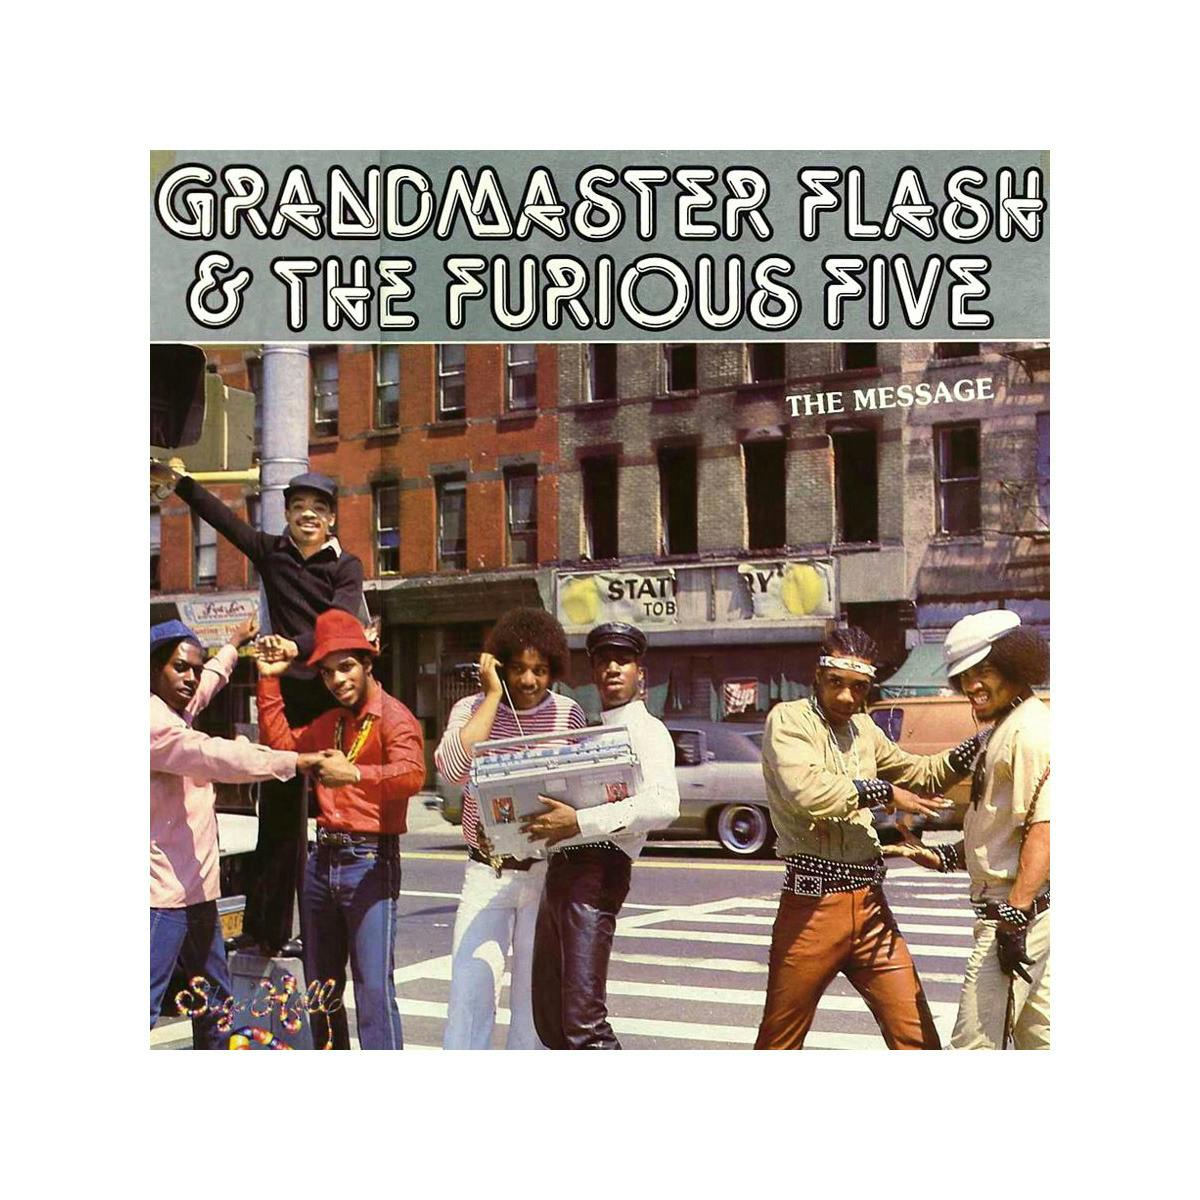 The message / by Grandmaster Flash & The Furious Five, 12inch with